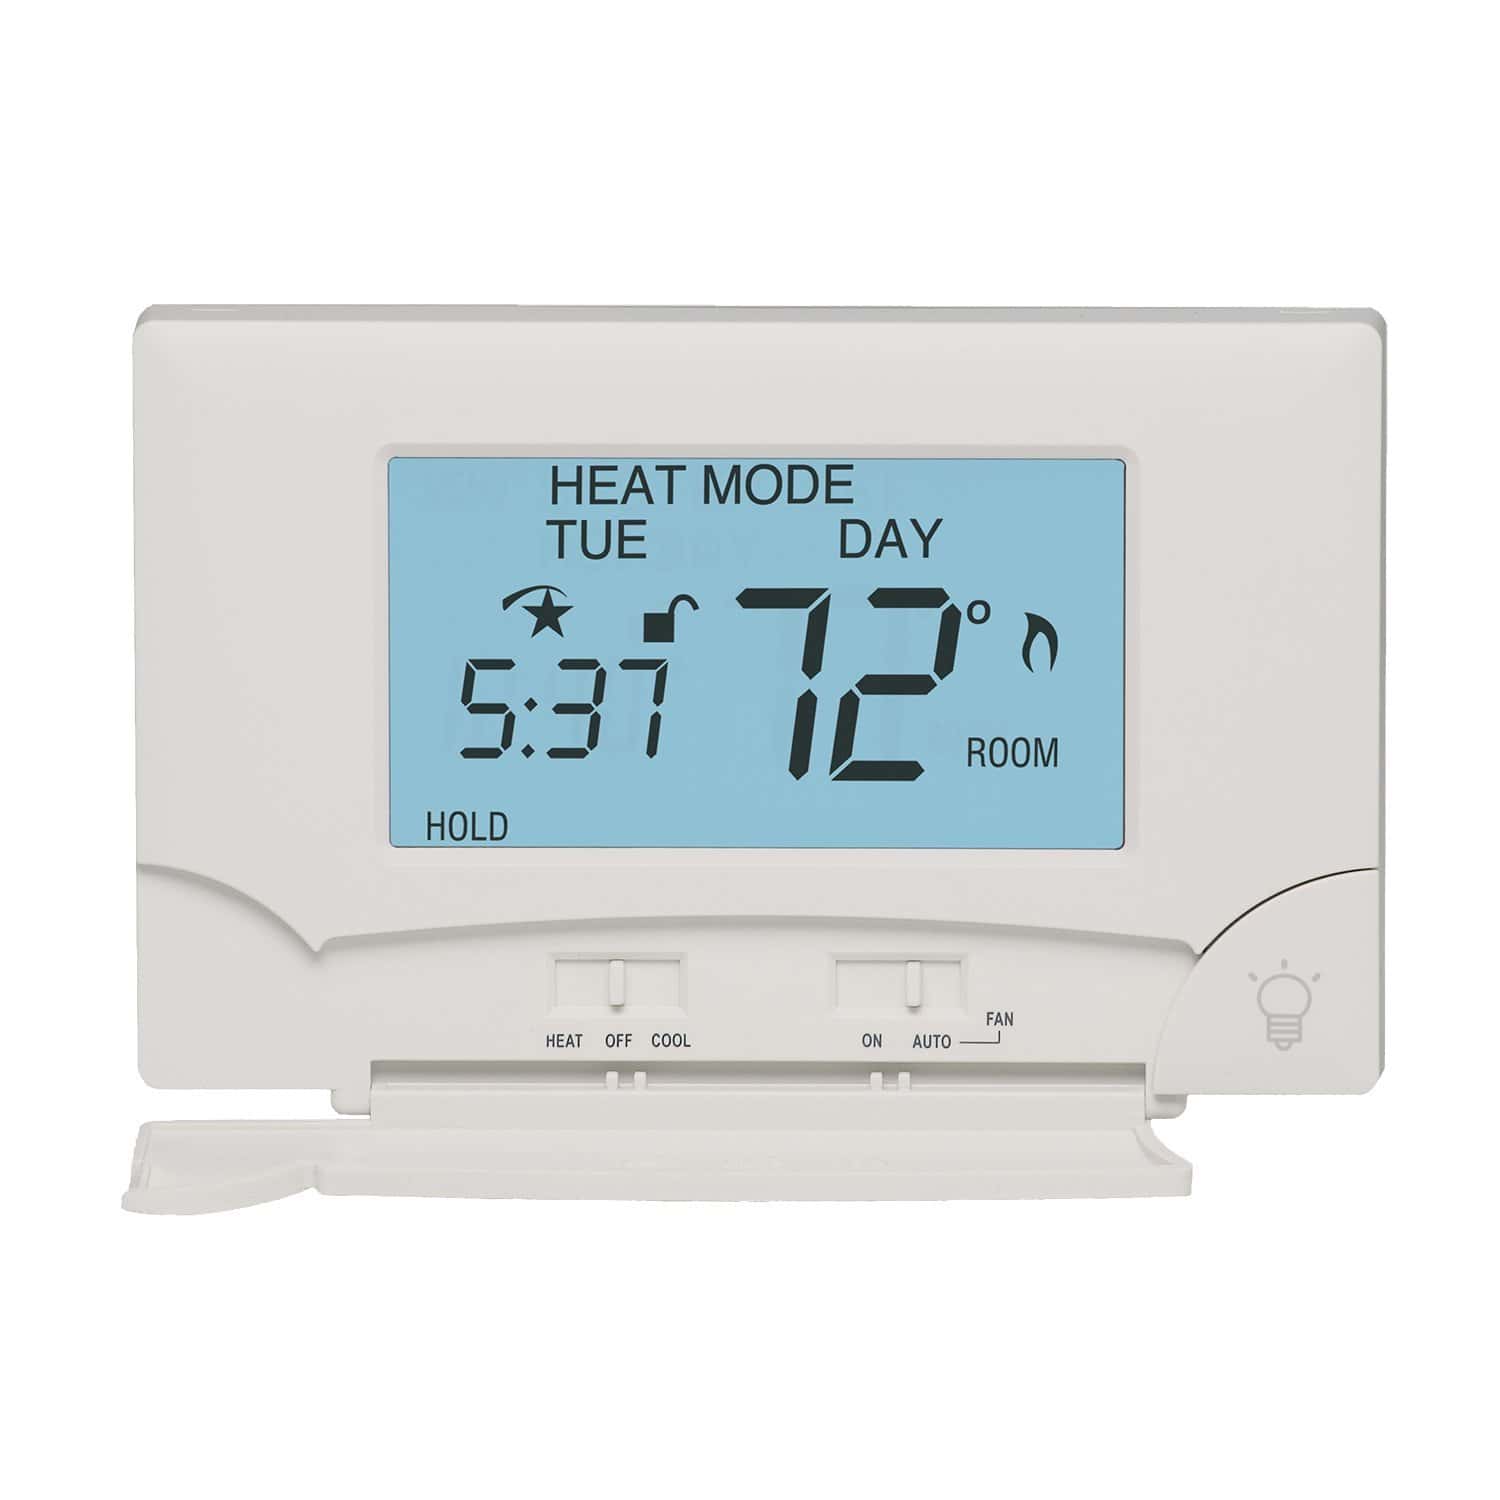 how to program honeywell thermostat manual